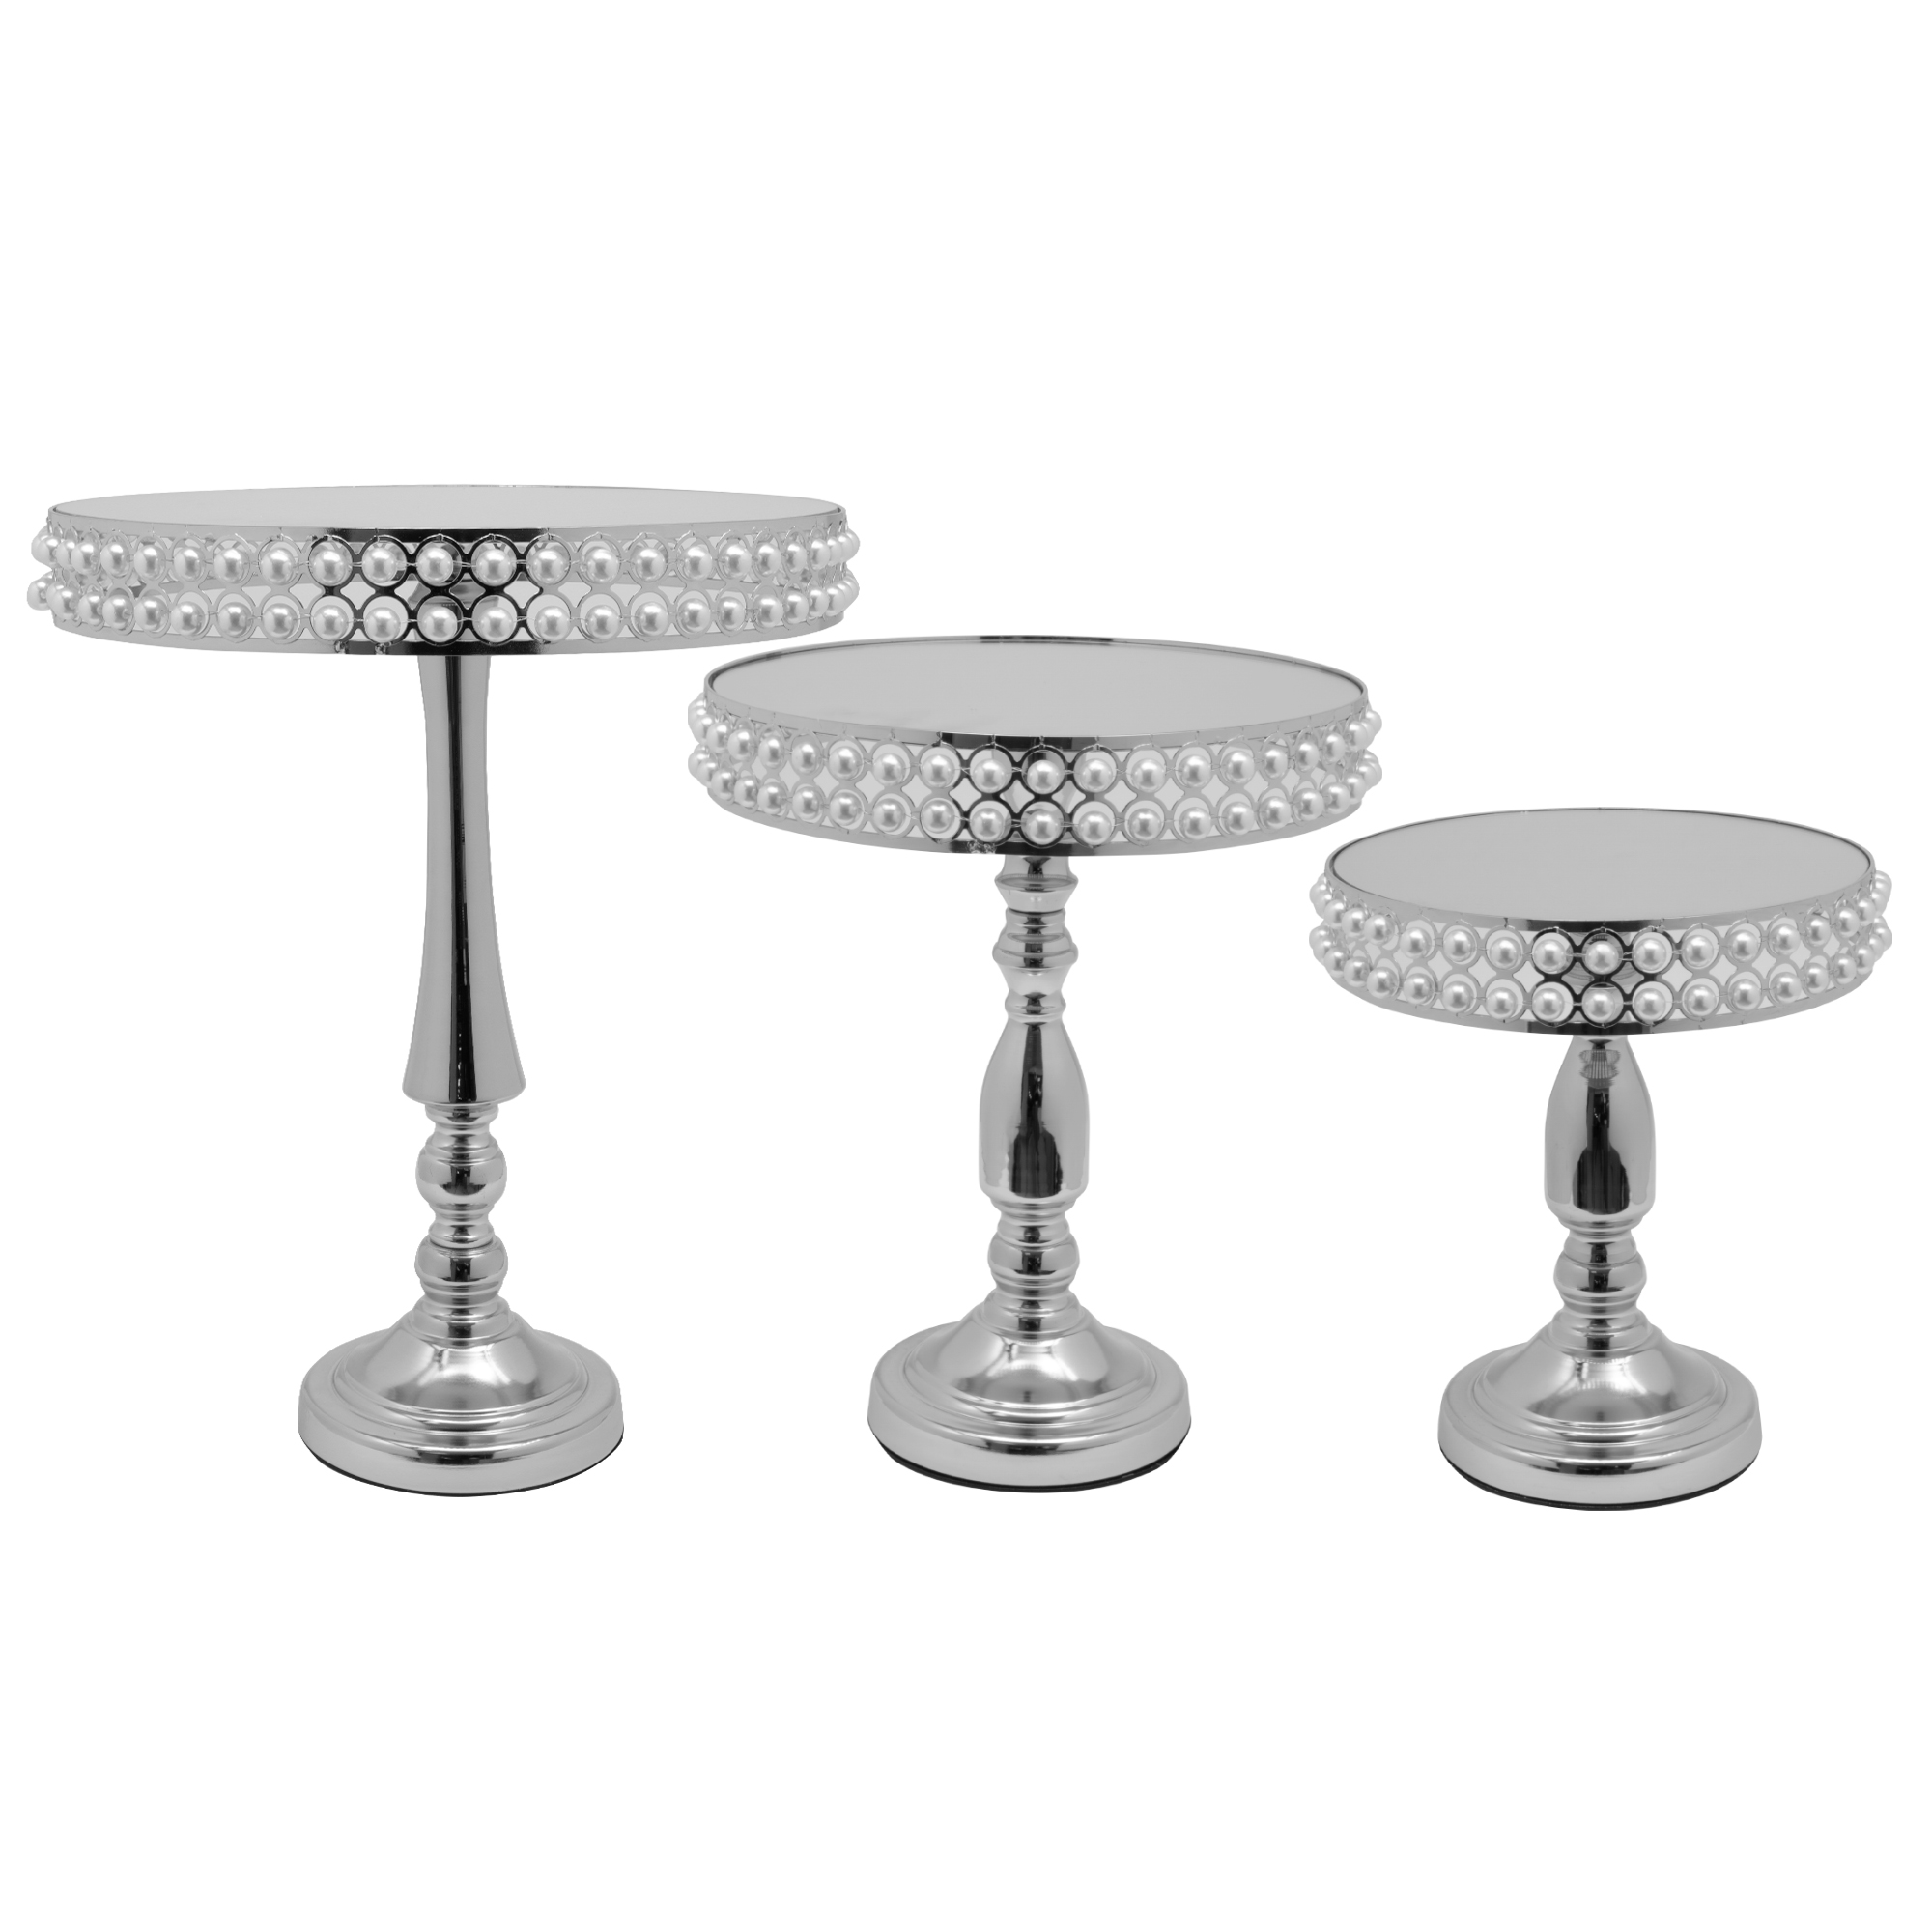 Metal Round Pearl Beaded Cake Stand 3pc/set - Silver